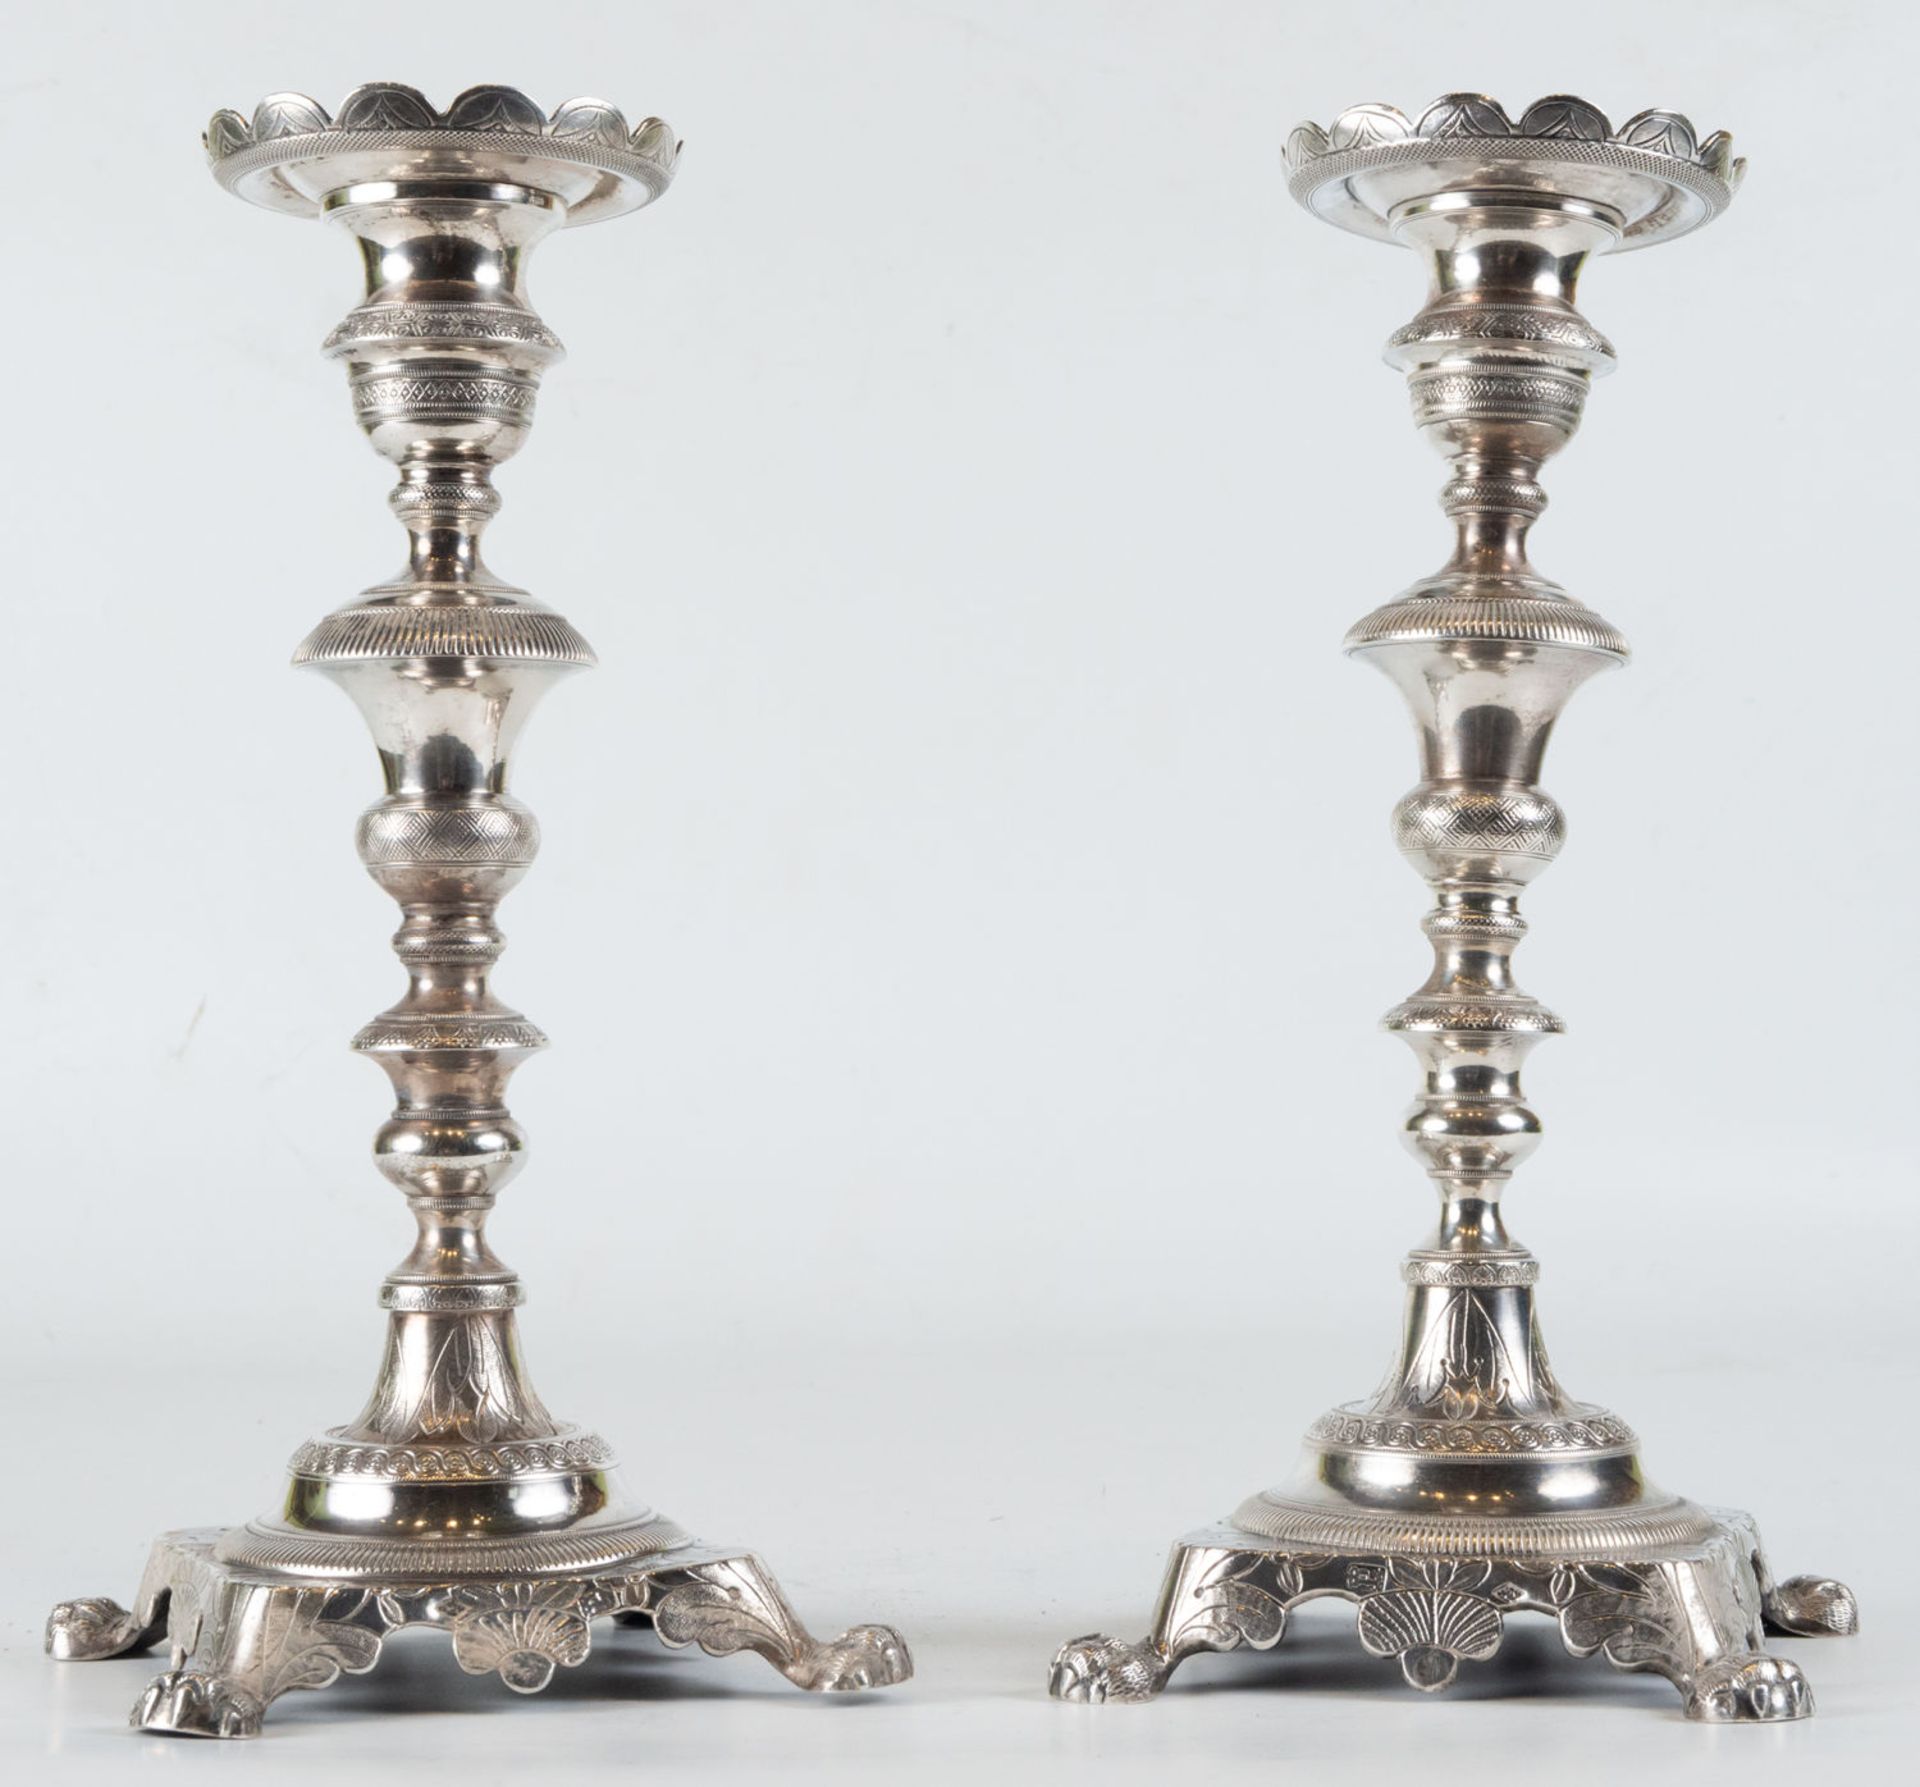 Pair of solid sterling silver candlesticks, 19th century